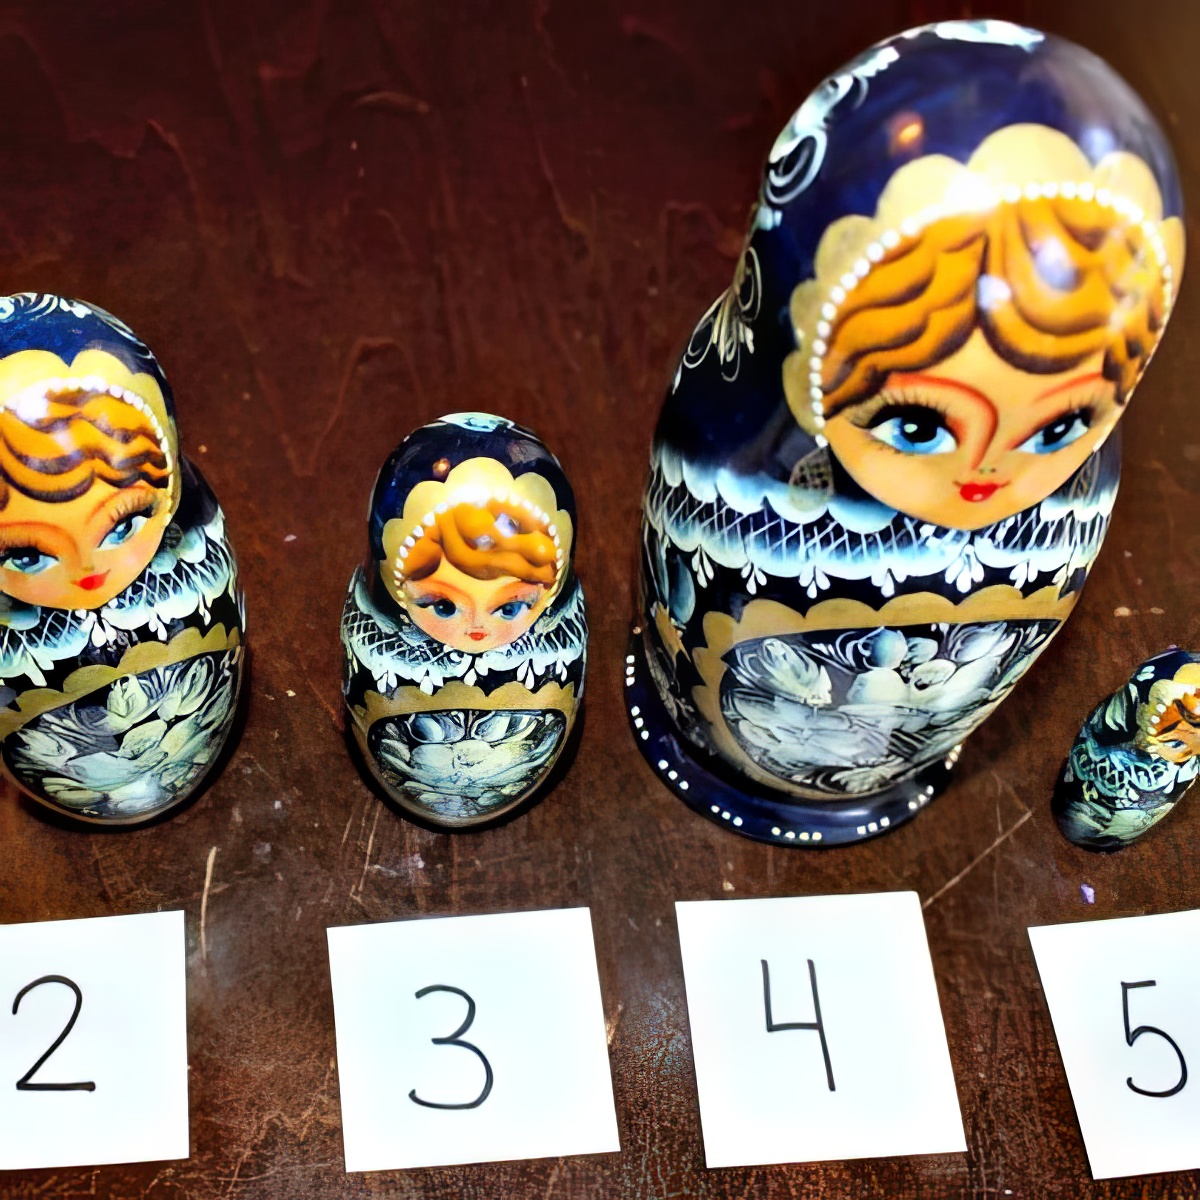 russian nesting dolls for preschool math, counting games